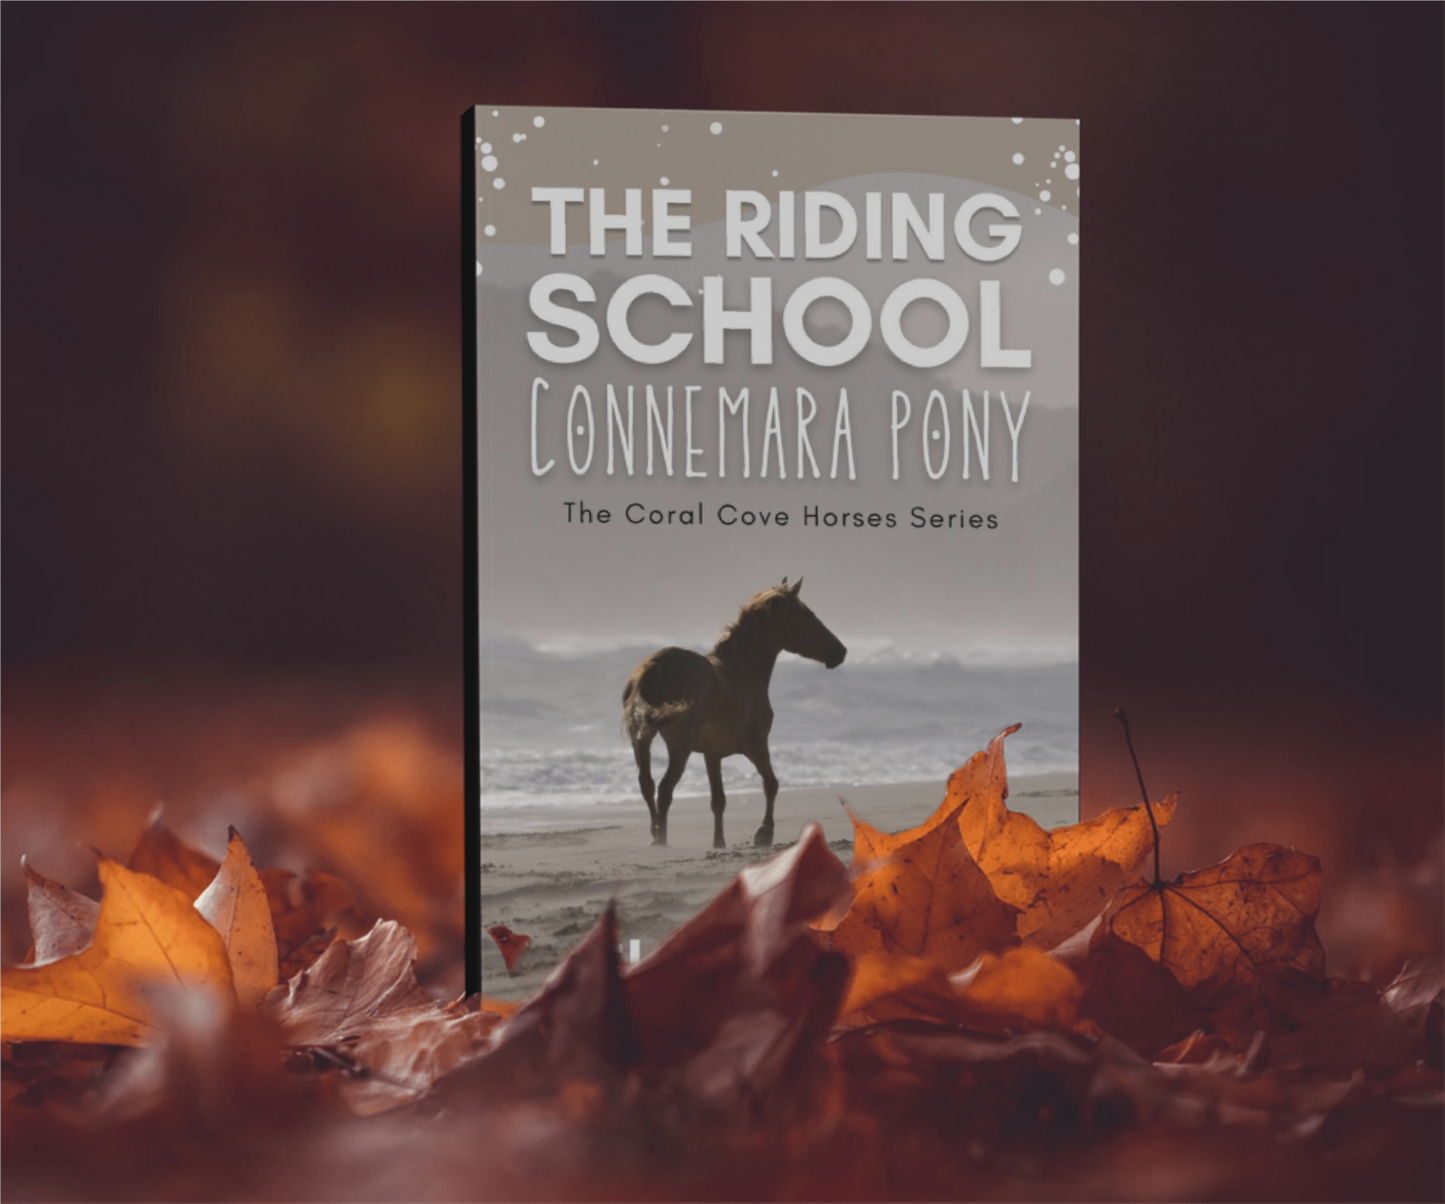 The Riding School Connemara Pony - The Coral Cove Horses Series